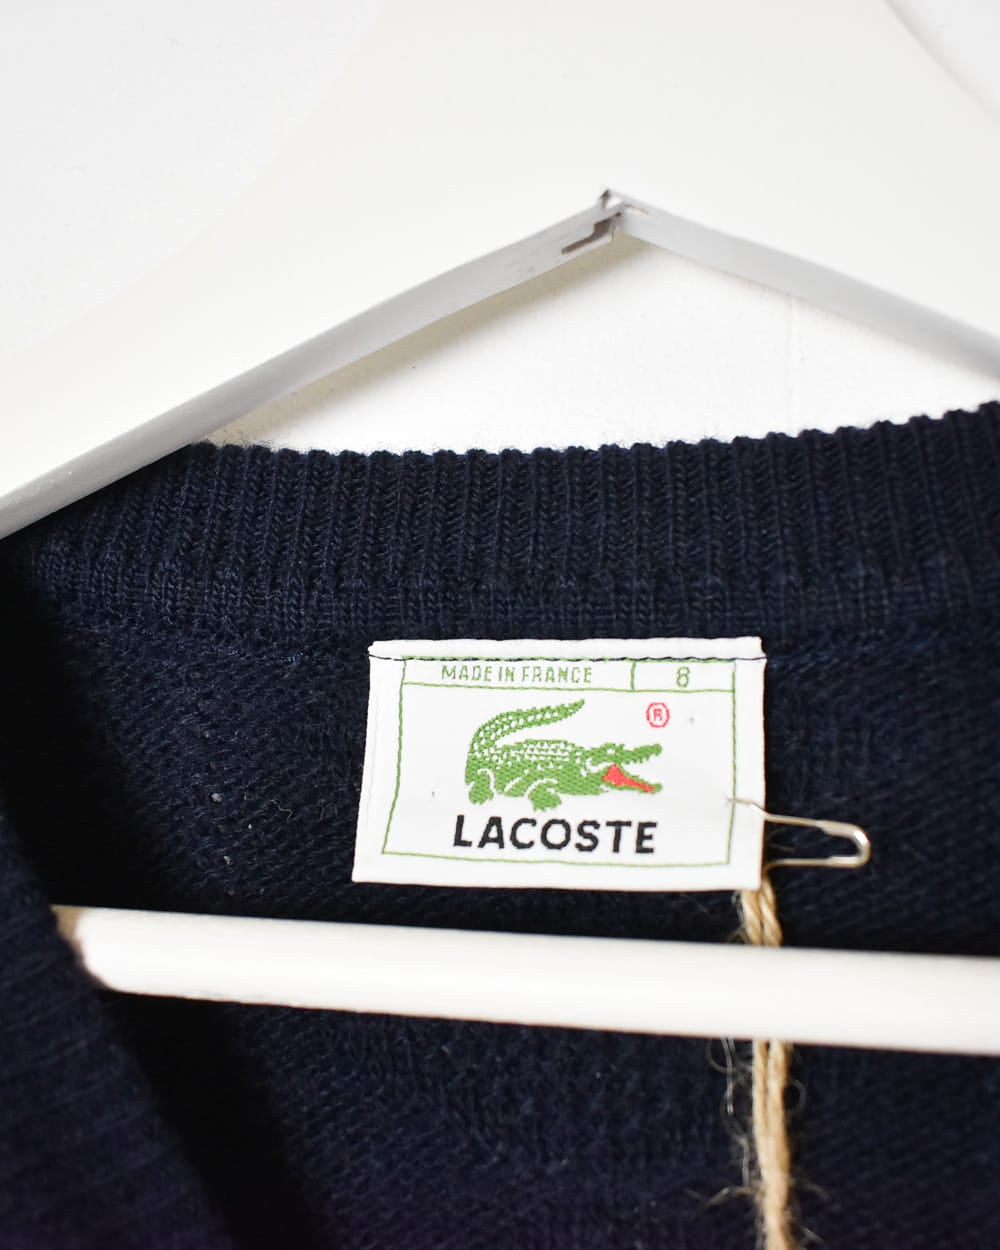 Navy Lacoste Knitted Sweatshirt - X-Large